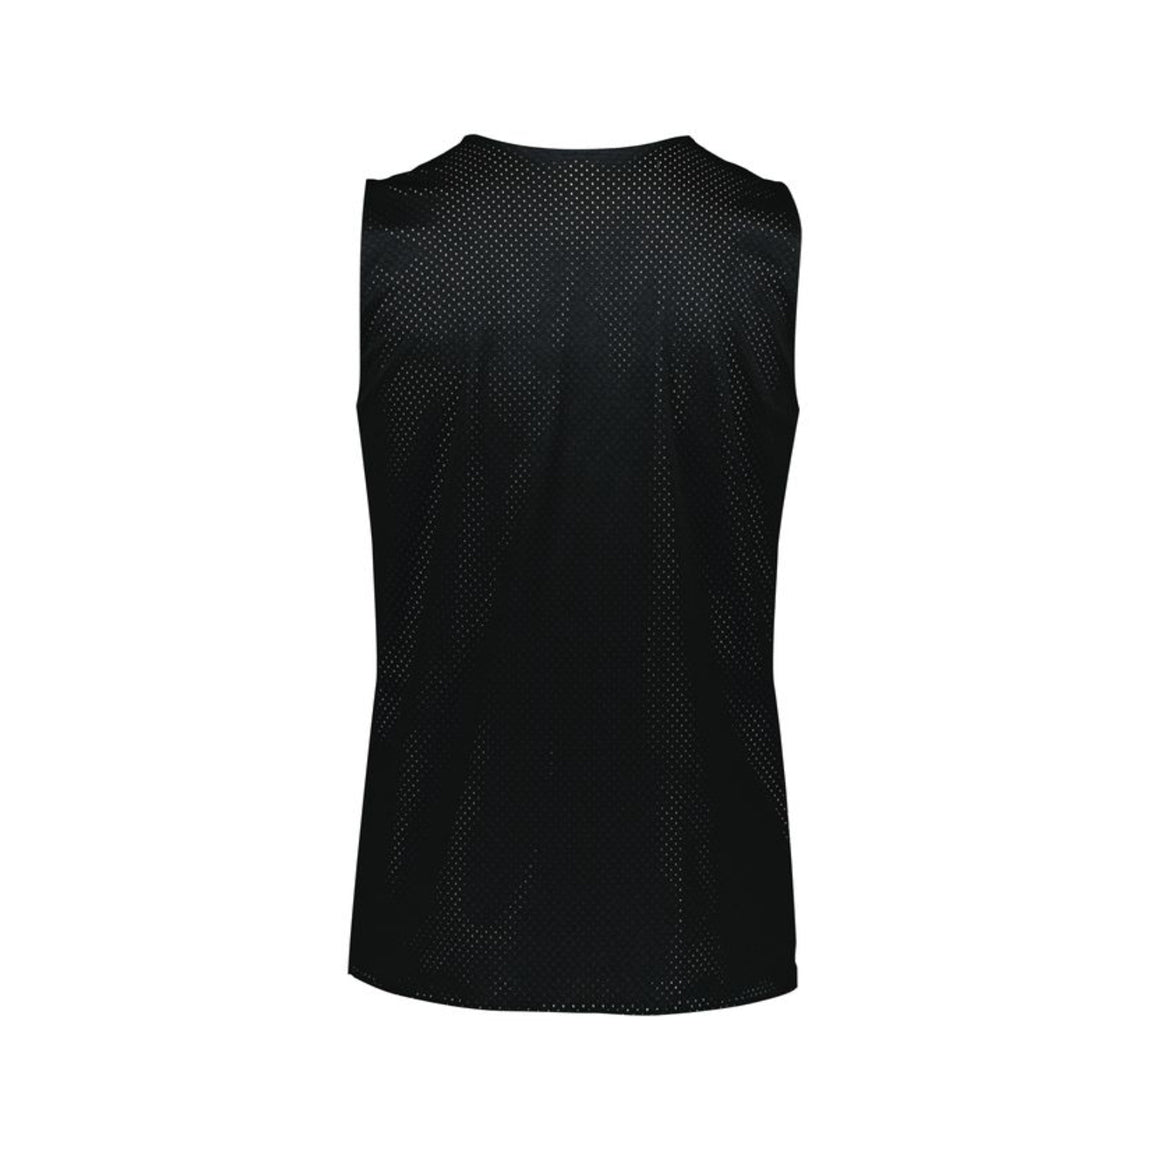 Tricot Mesh Reversible Jersey 2.0